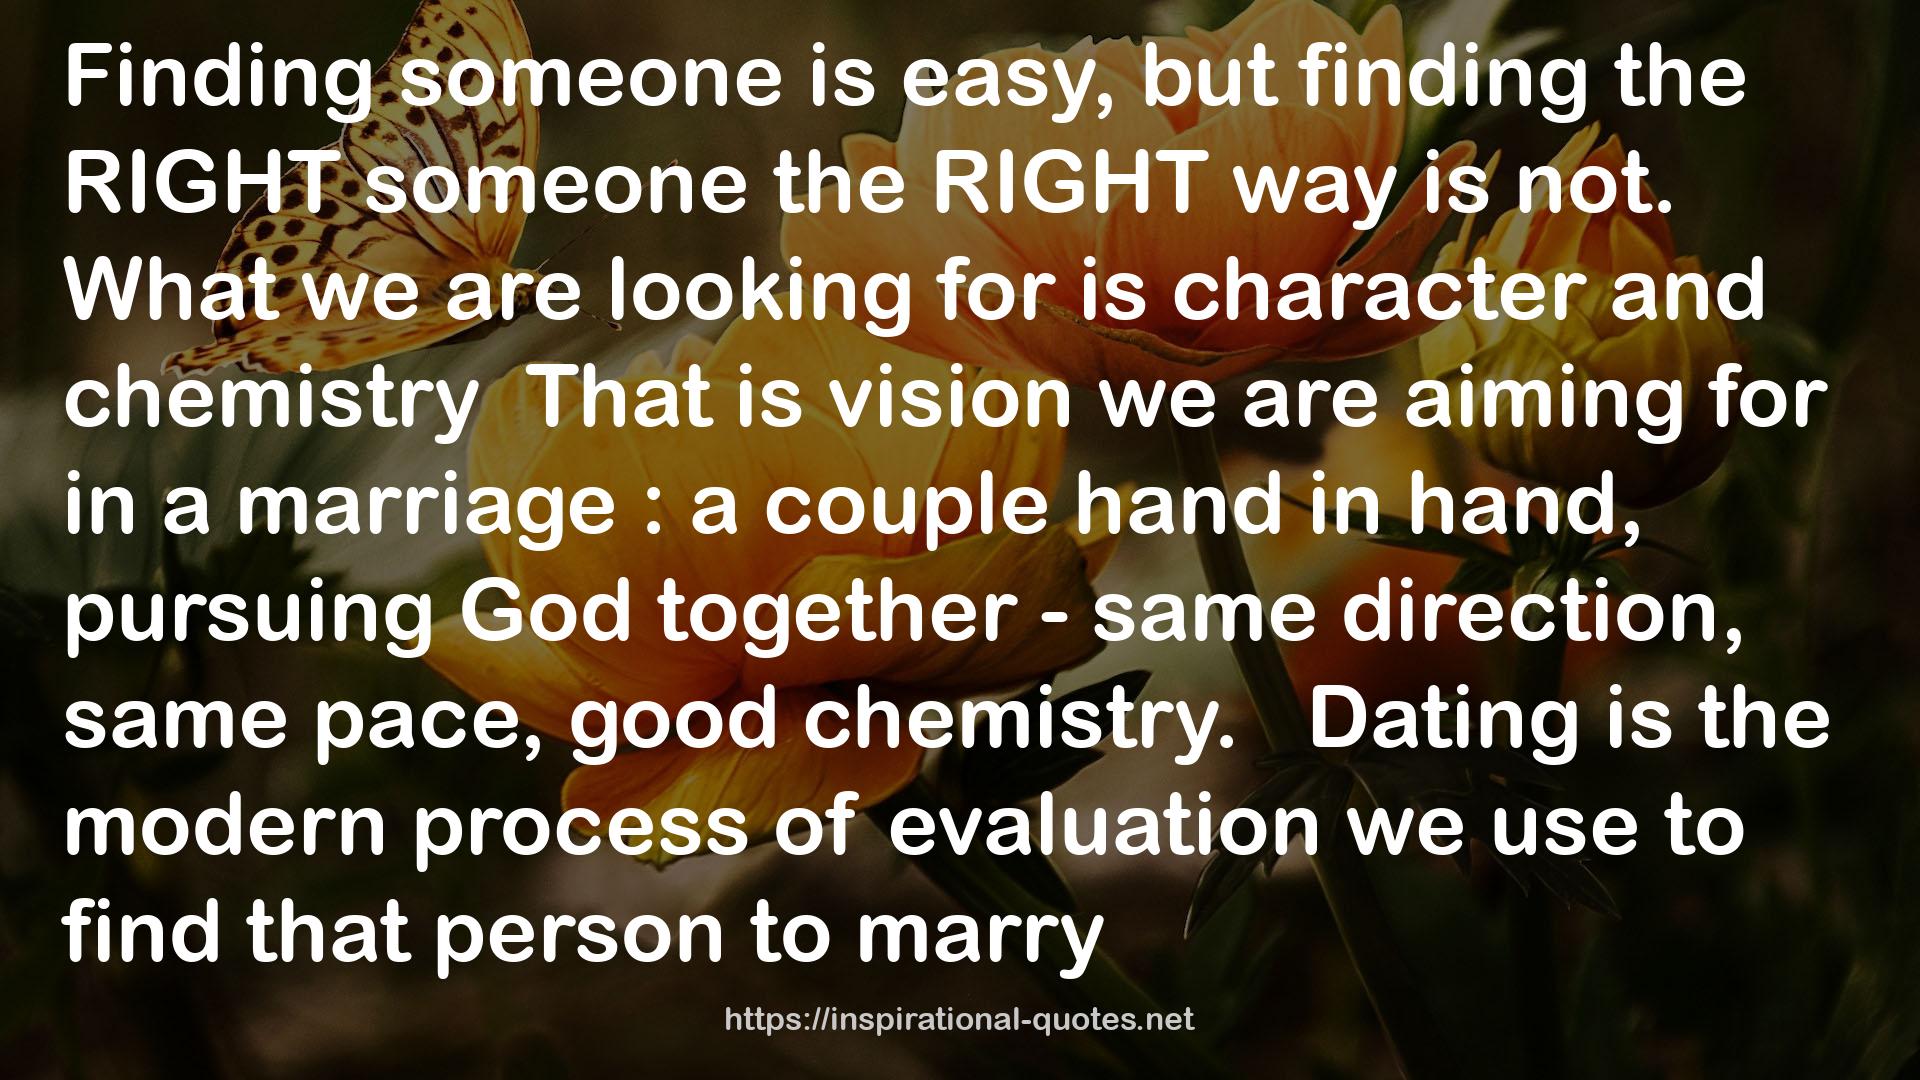 Single, Dating, Engaged, Married: Navigating Life and Love in the Modern Age QUOTES